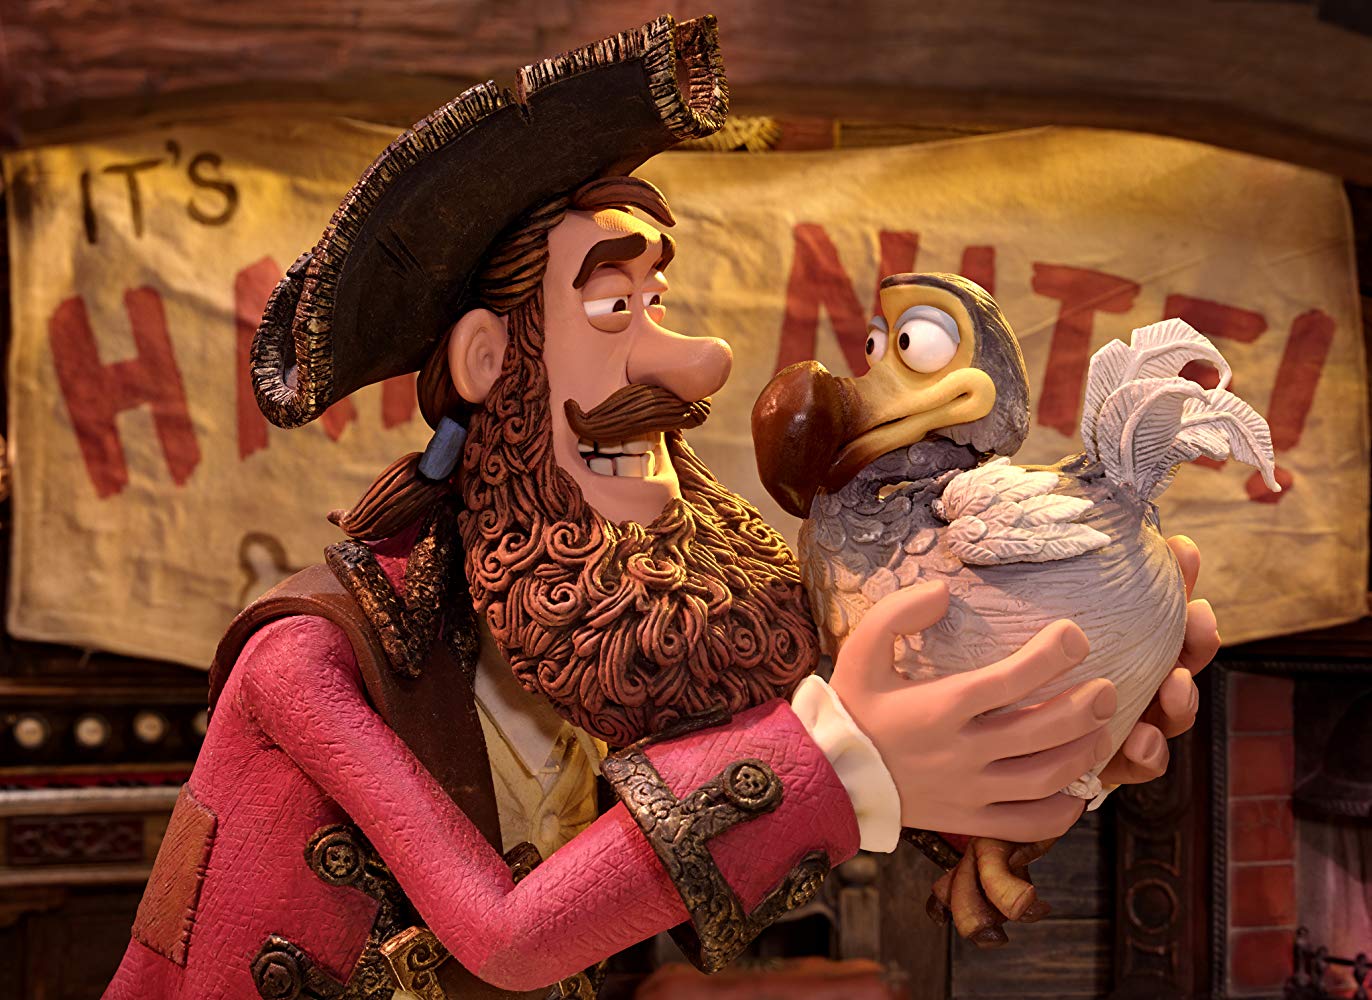 The Pirate Captain (voiced by Hugh Grant) and Polly the dodo in The Pirates Band of Misfits (2012)